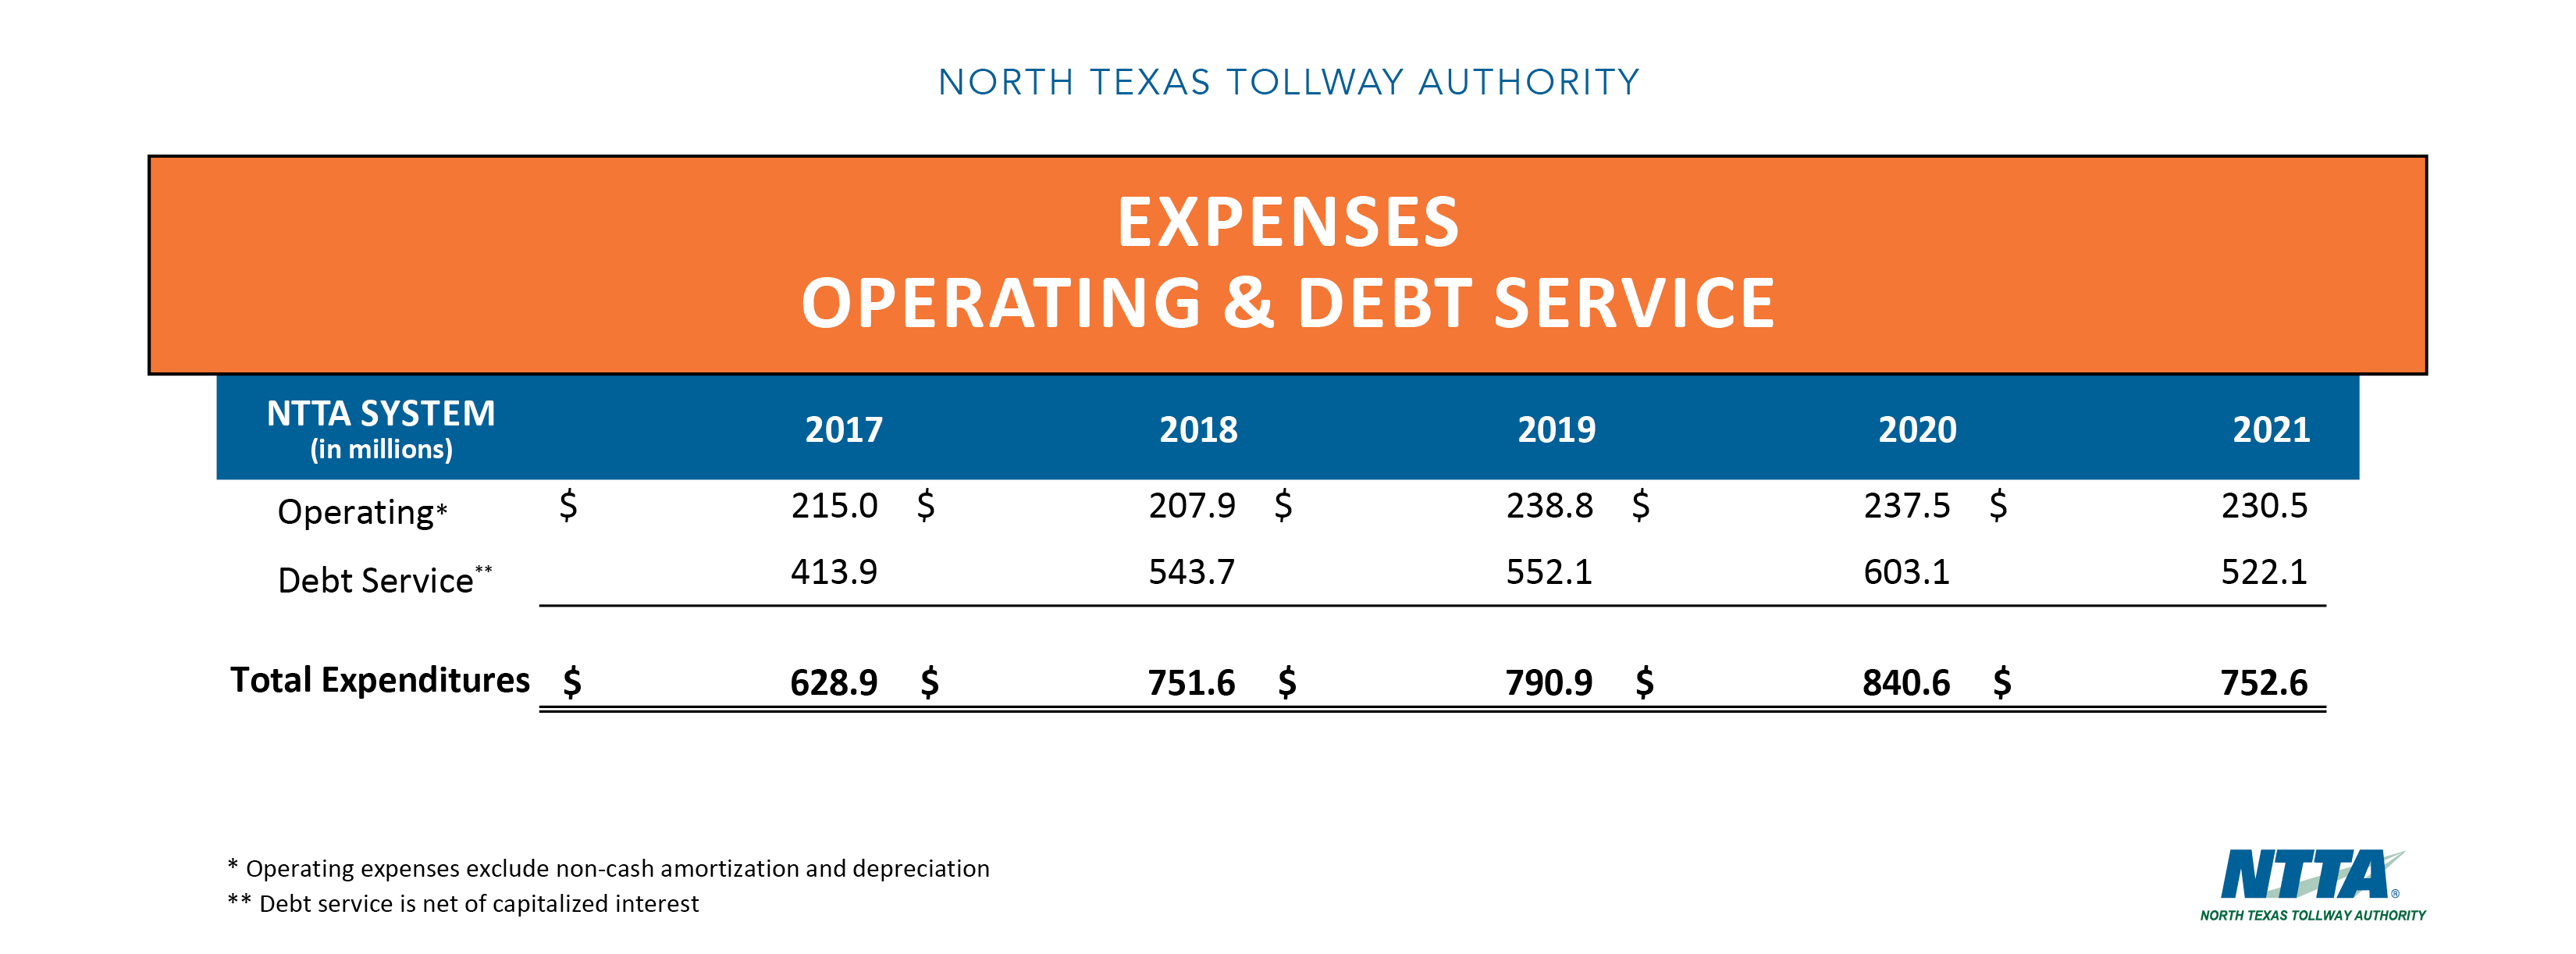 Expenses - Operating and debt service